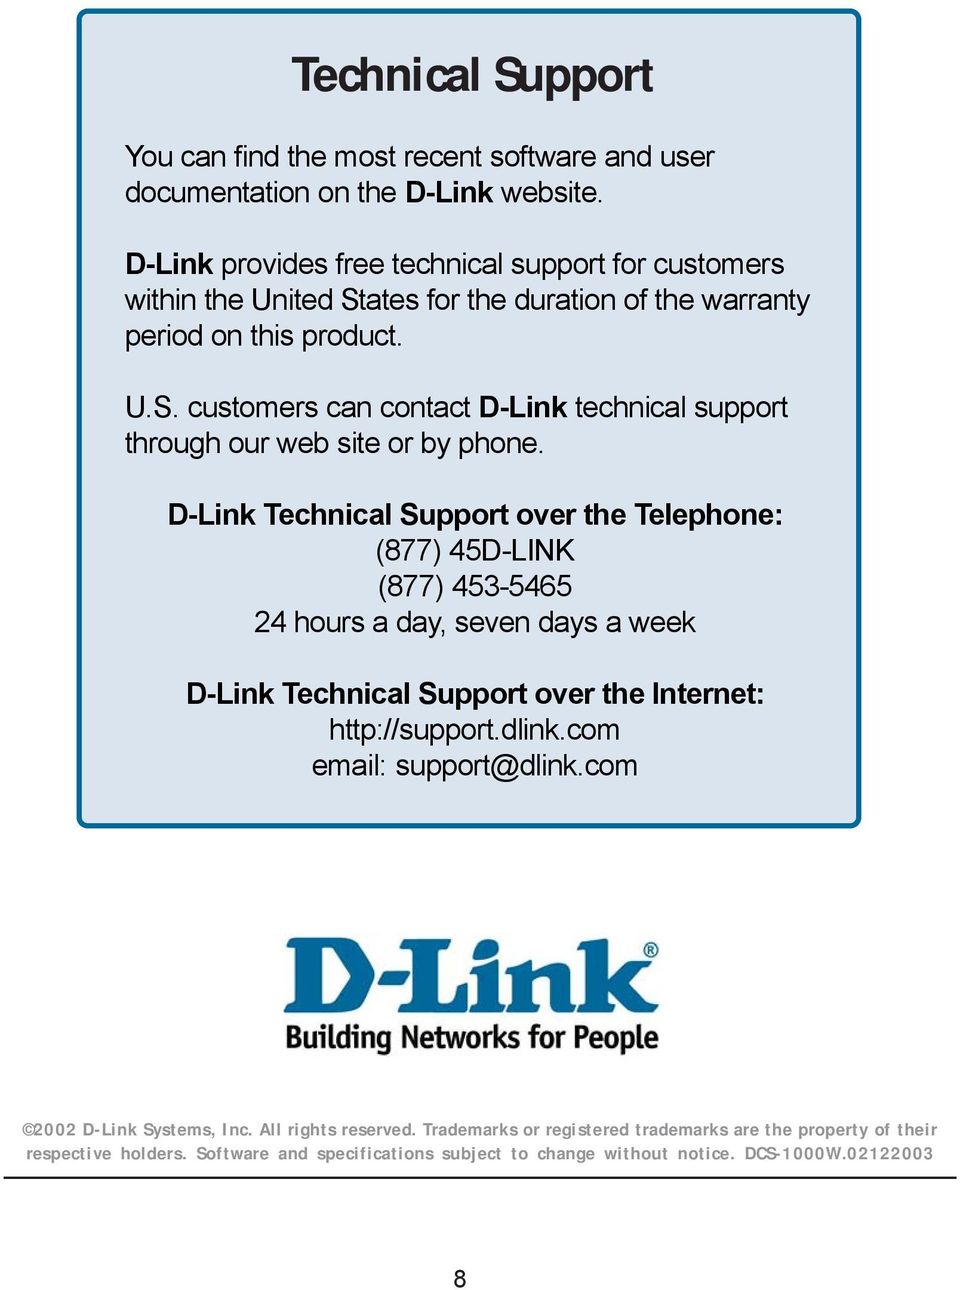 D-Link Technical Support over the Telephone: (877) 45D-LINK (877) 453-5465 24 hours a day, seven days a week D-Link Technical Support over the Internet: http://support.dlink.